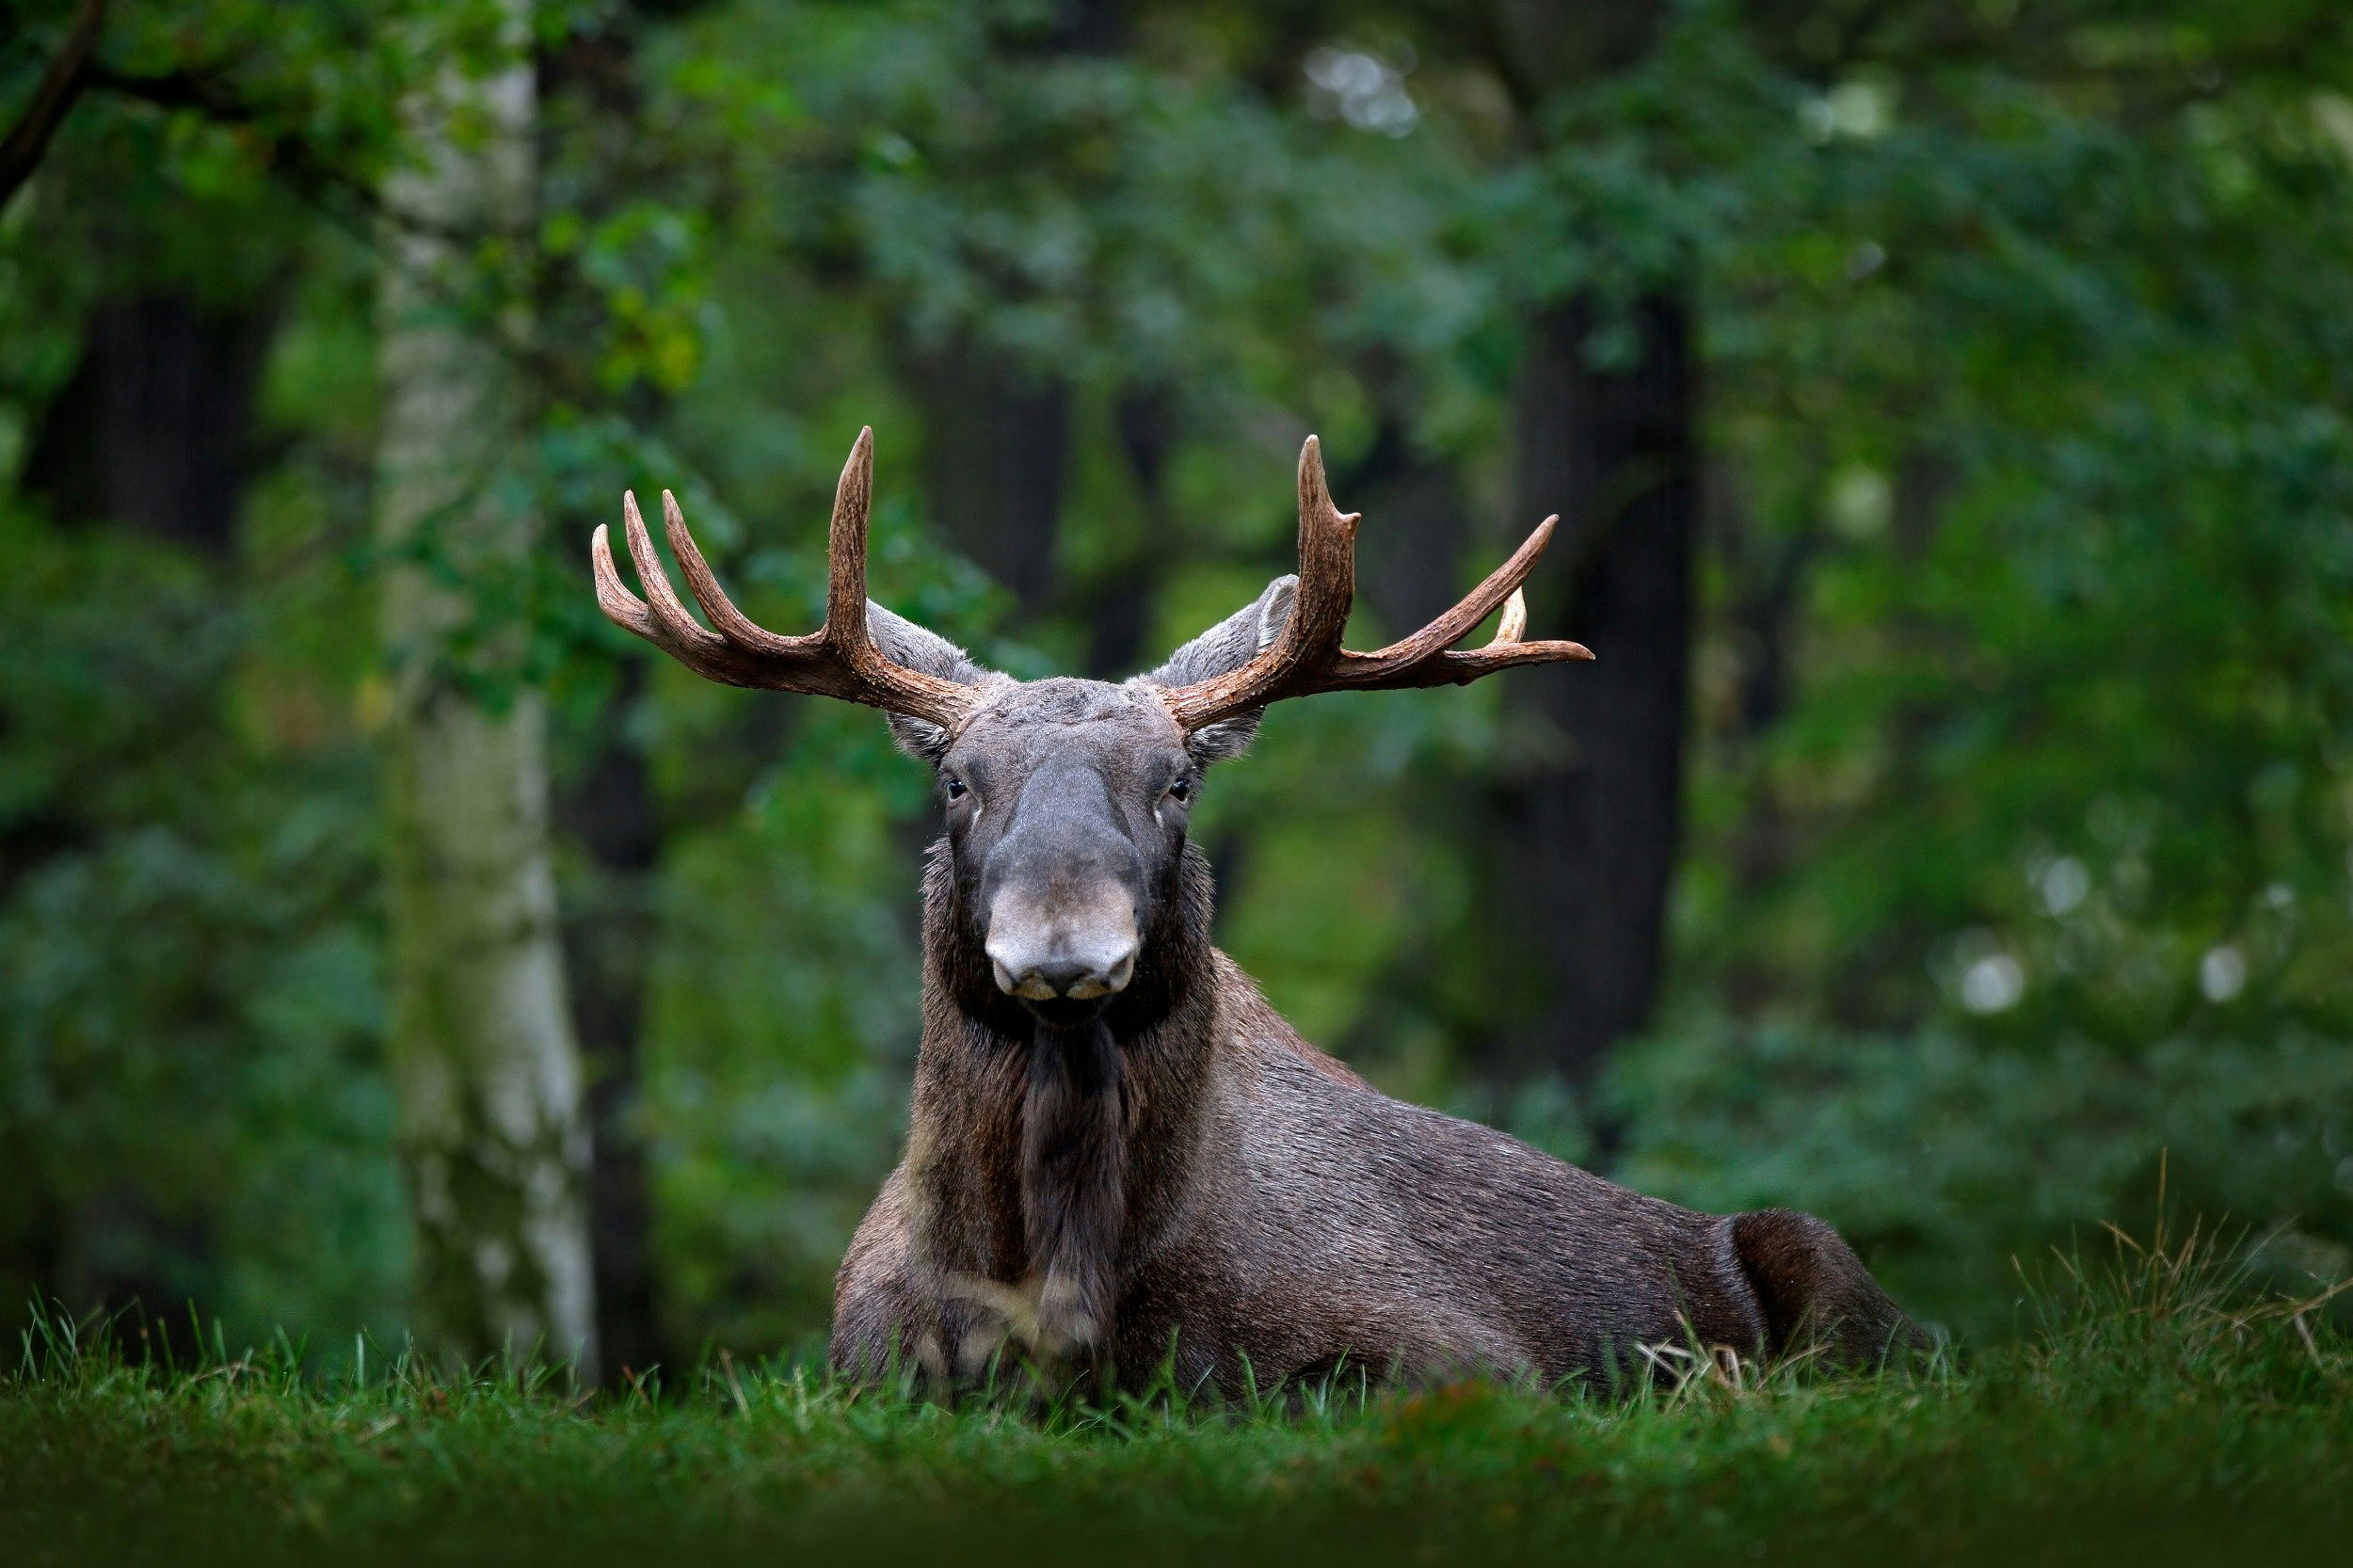 A moose lays on the ground with its head up, facing the camera; its antlers stand out against the forest background.